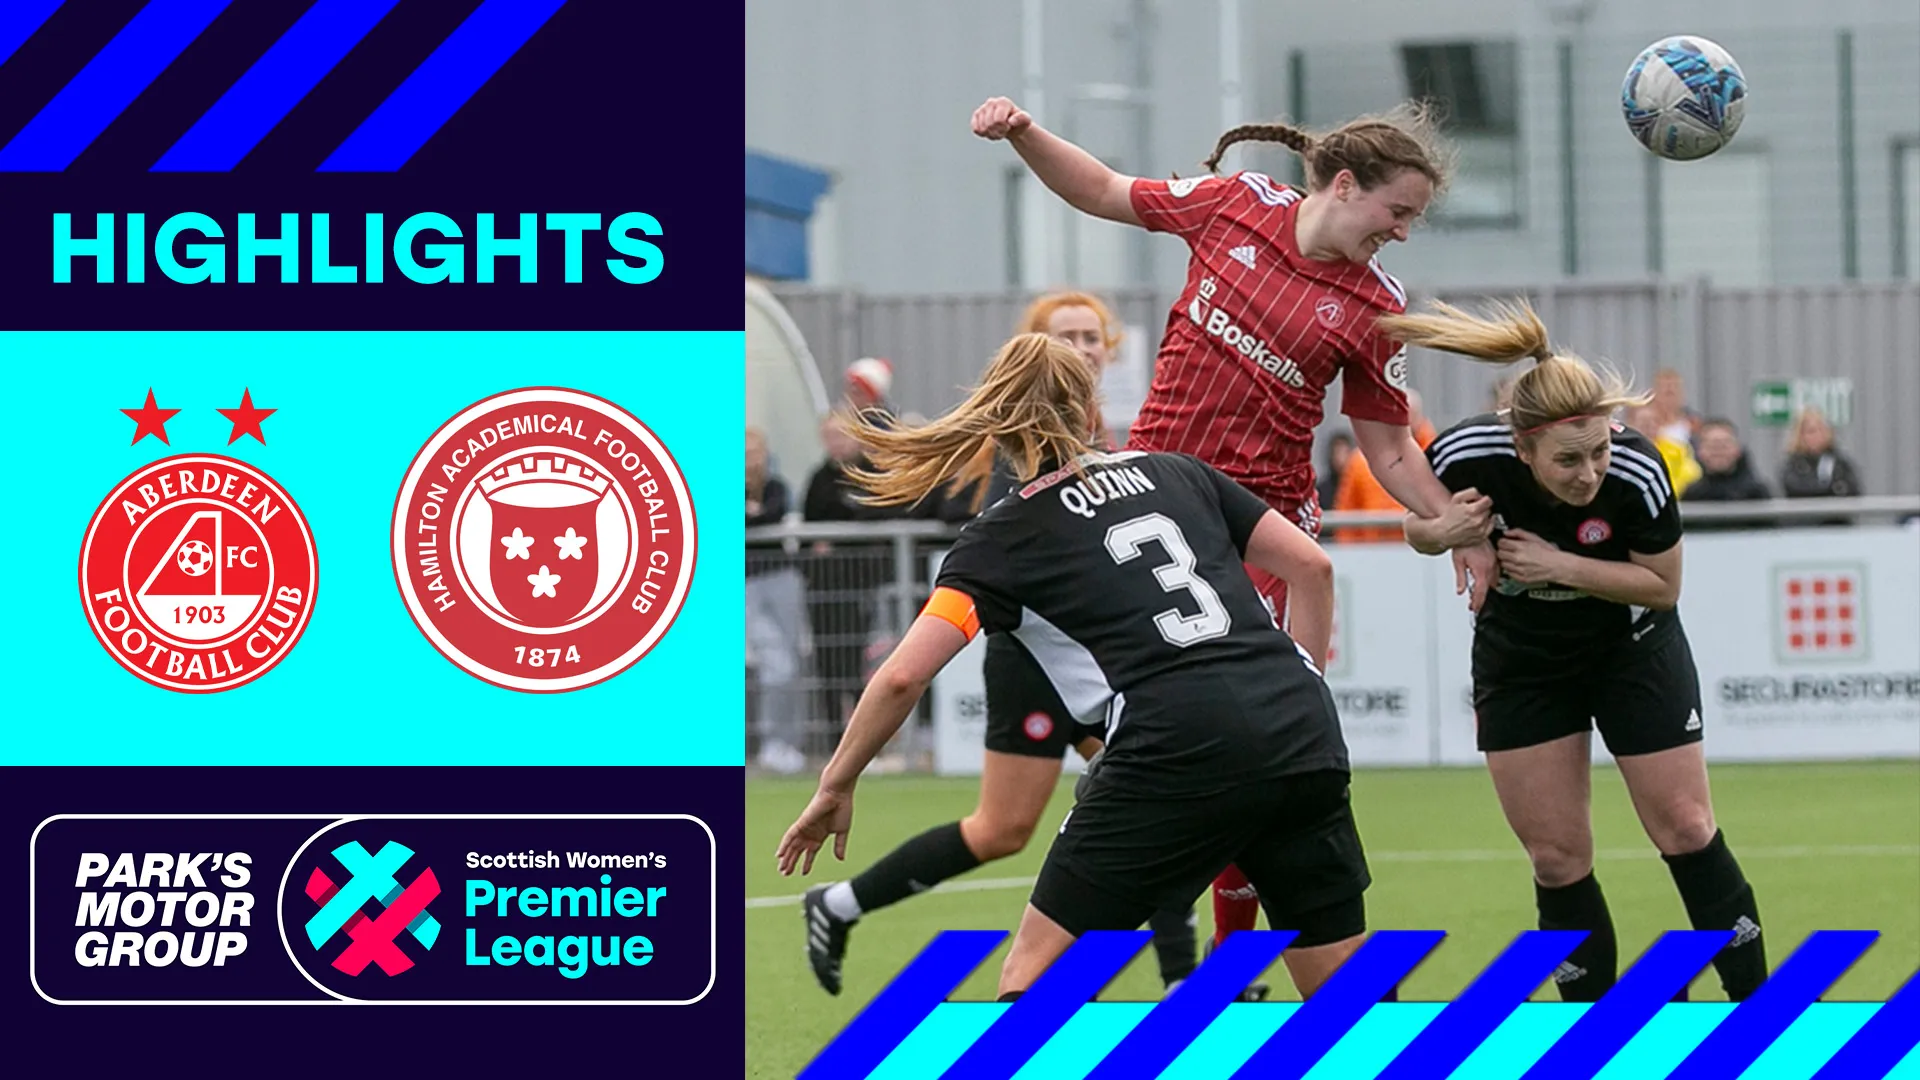 Image for Aberdeen 2-1 Hamilton Academical | Dons move 5 points clear of relegation play-off | SWPL